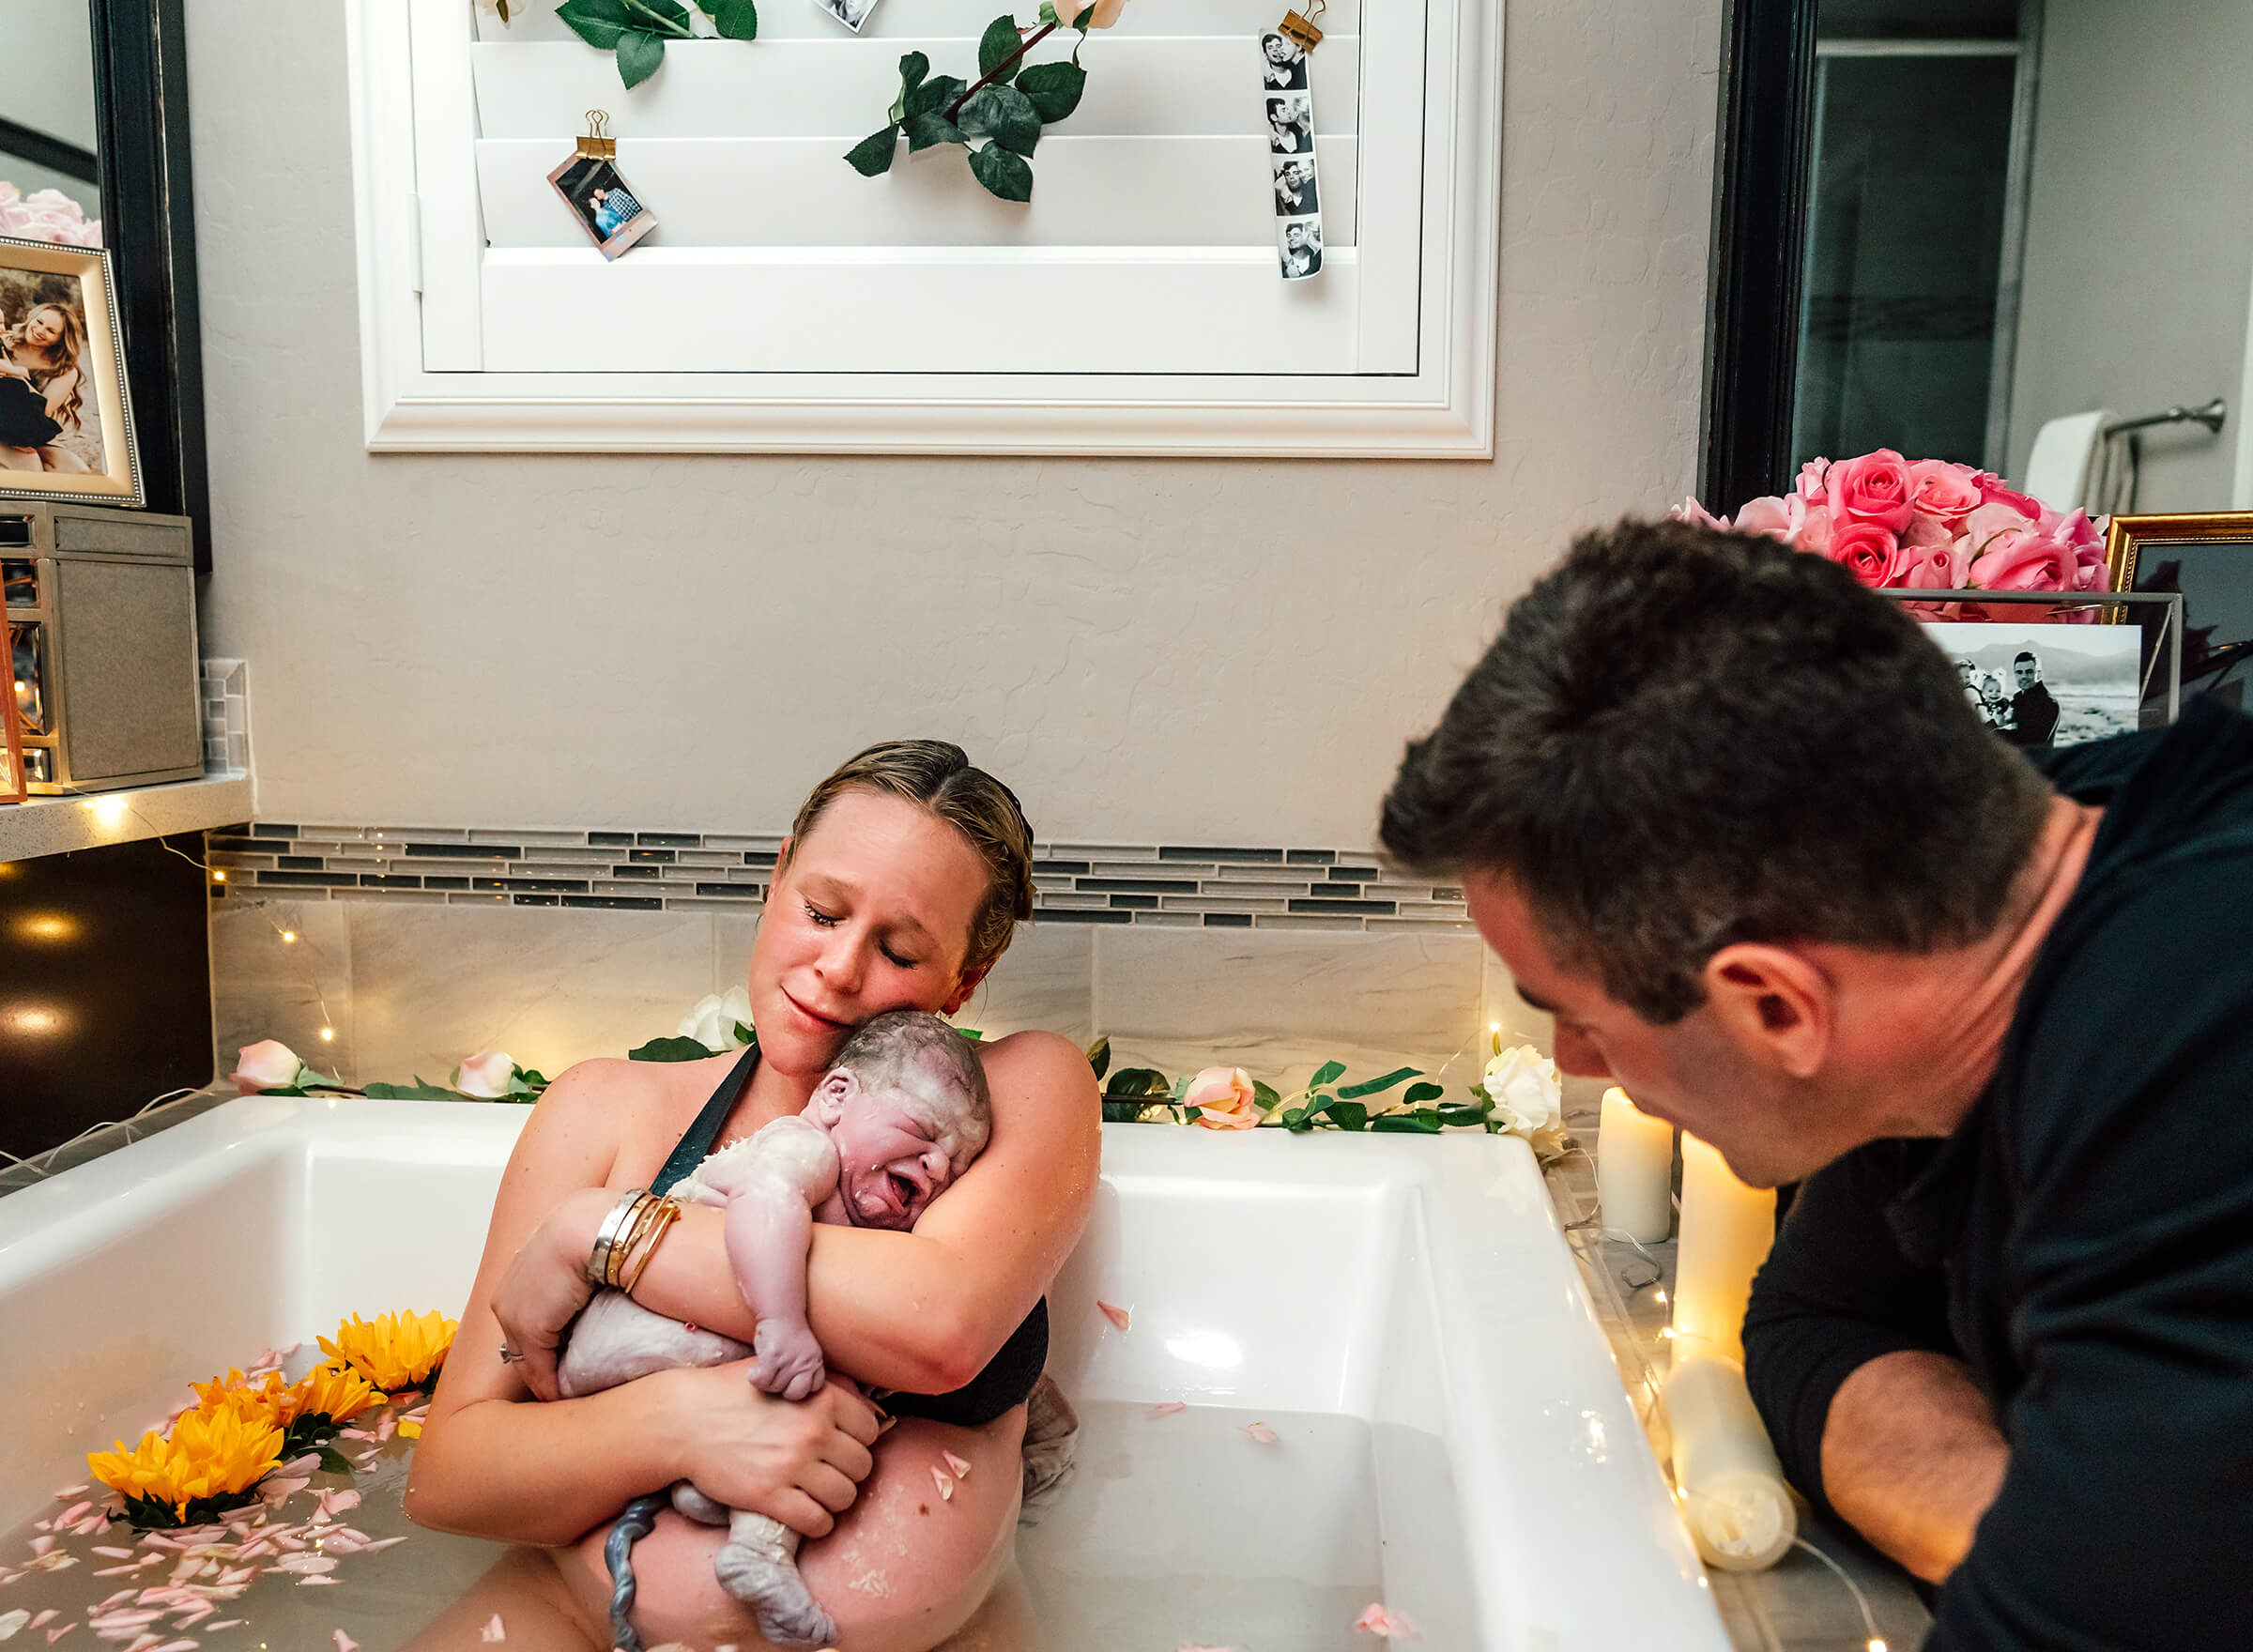 emotional mother holding her baby after birth at home in tub in Las Vegas 2019